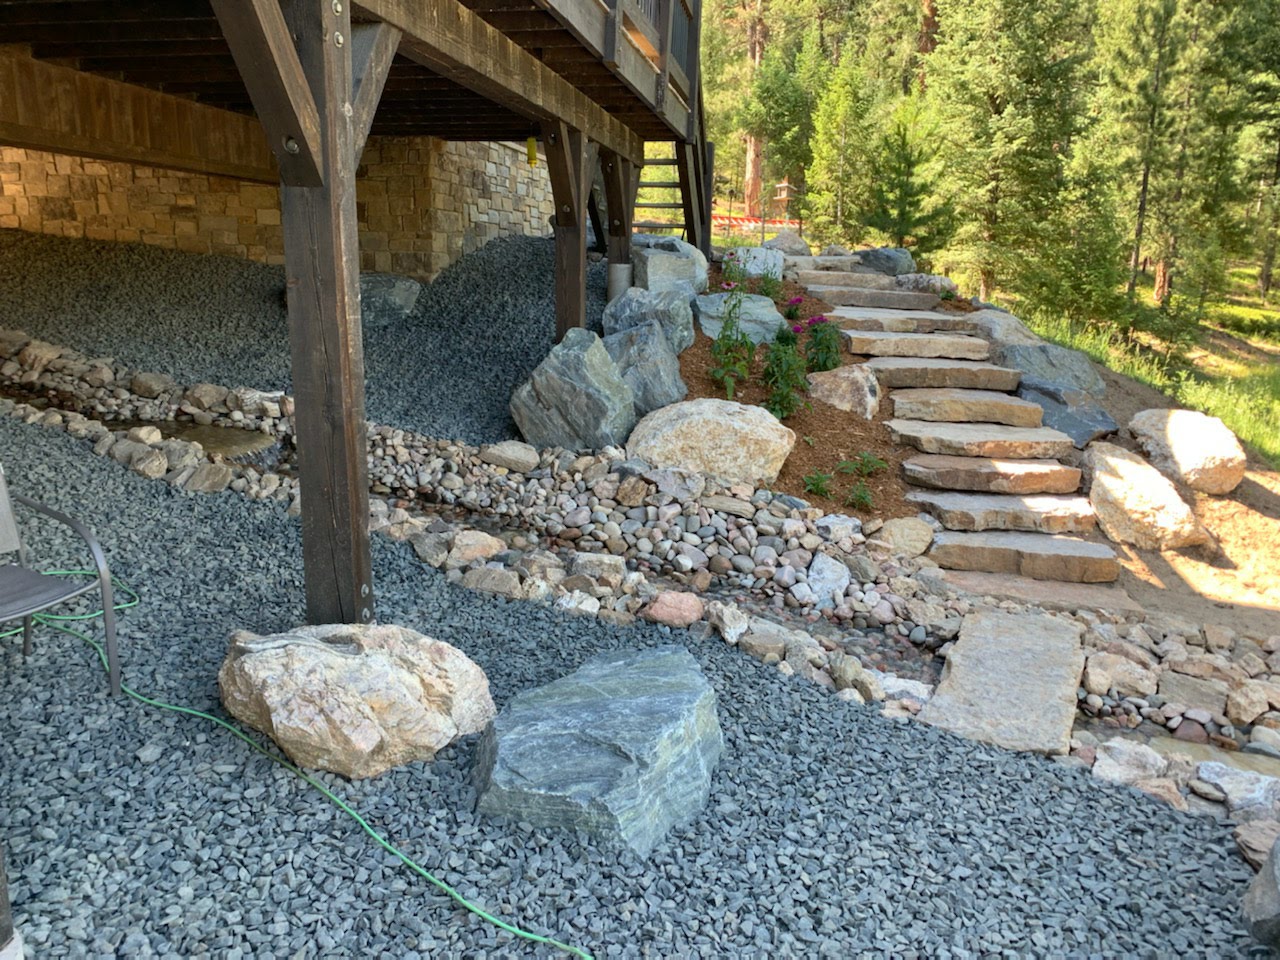 Landscaped streambed or water feature with rock staircase nearby